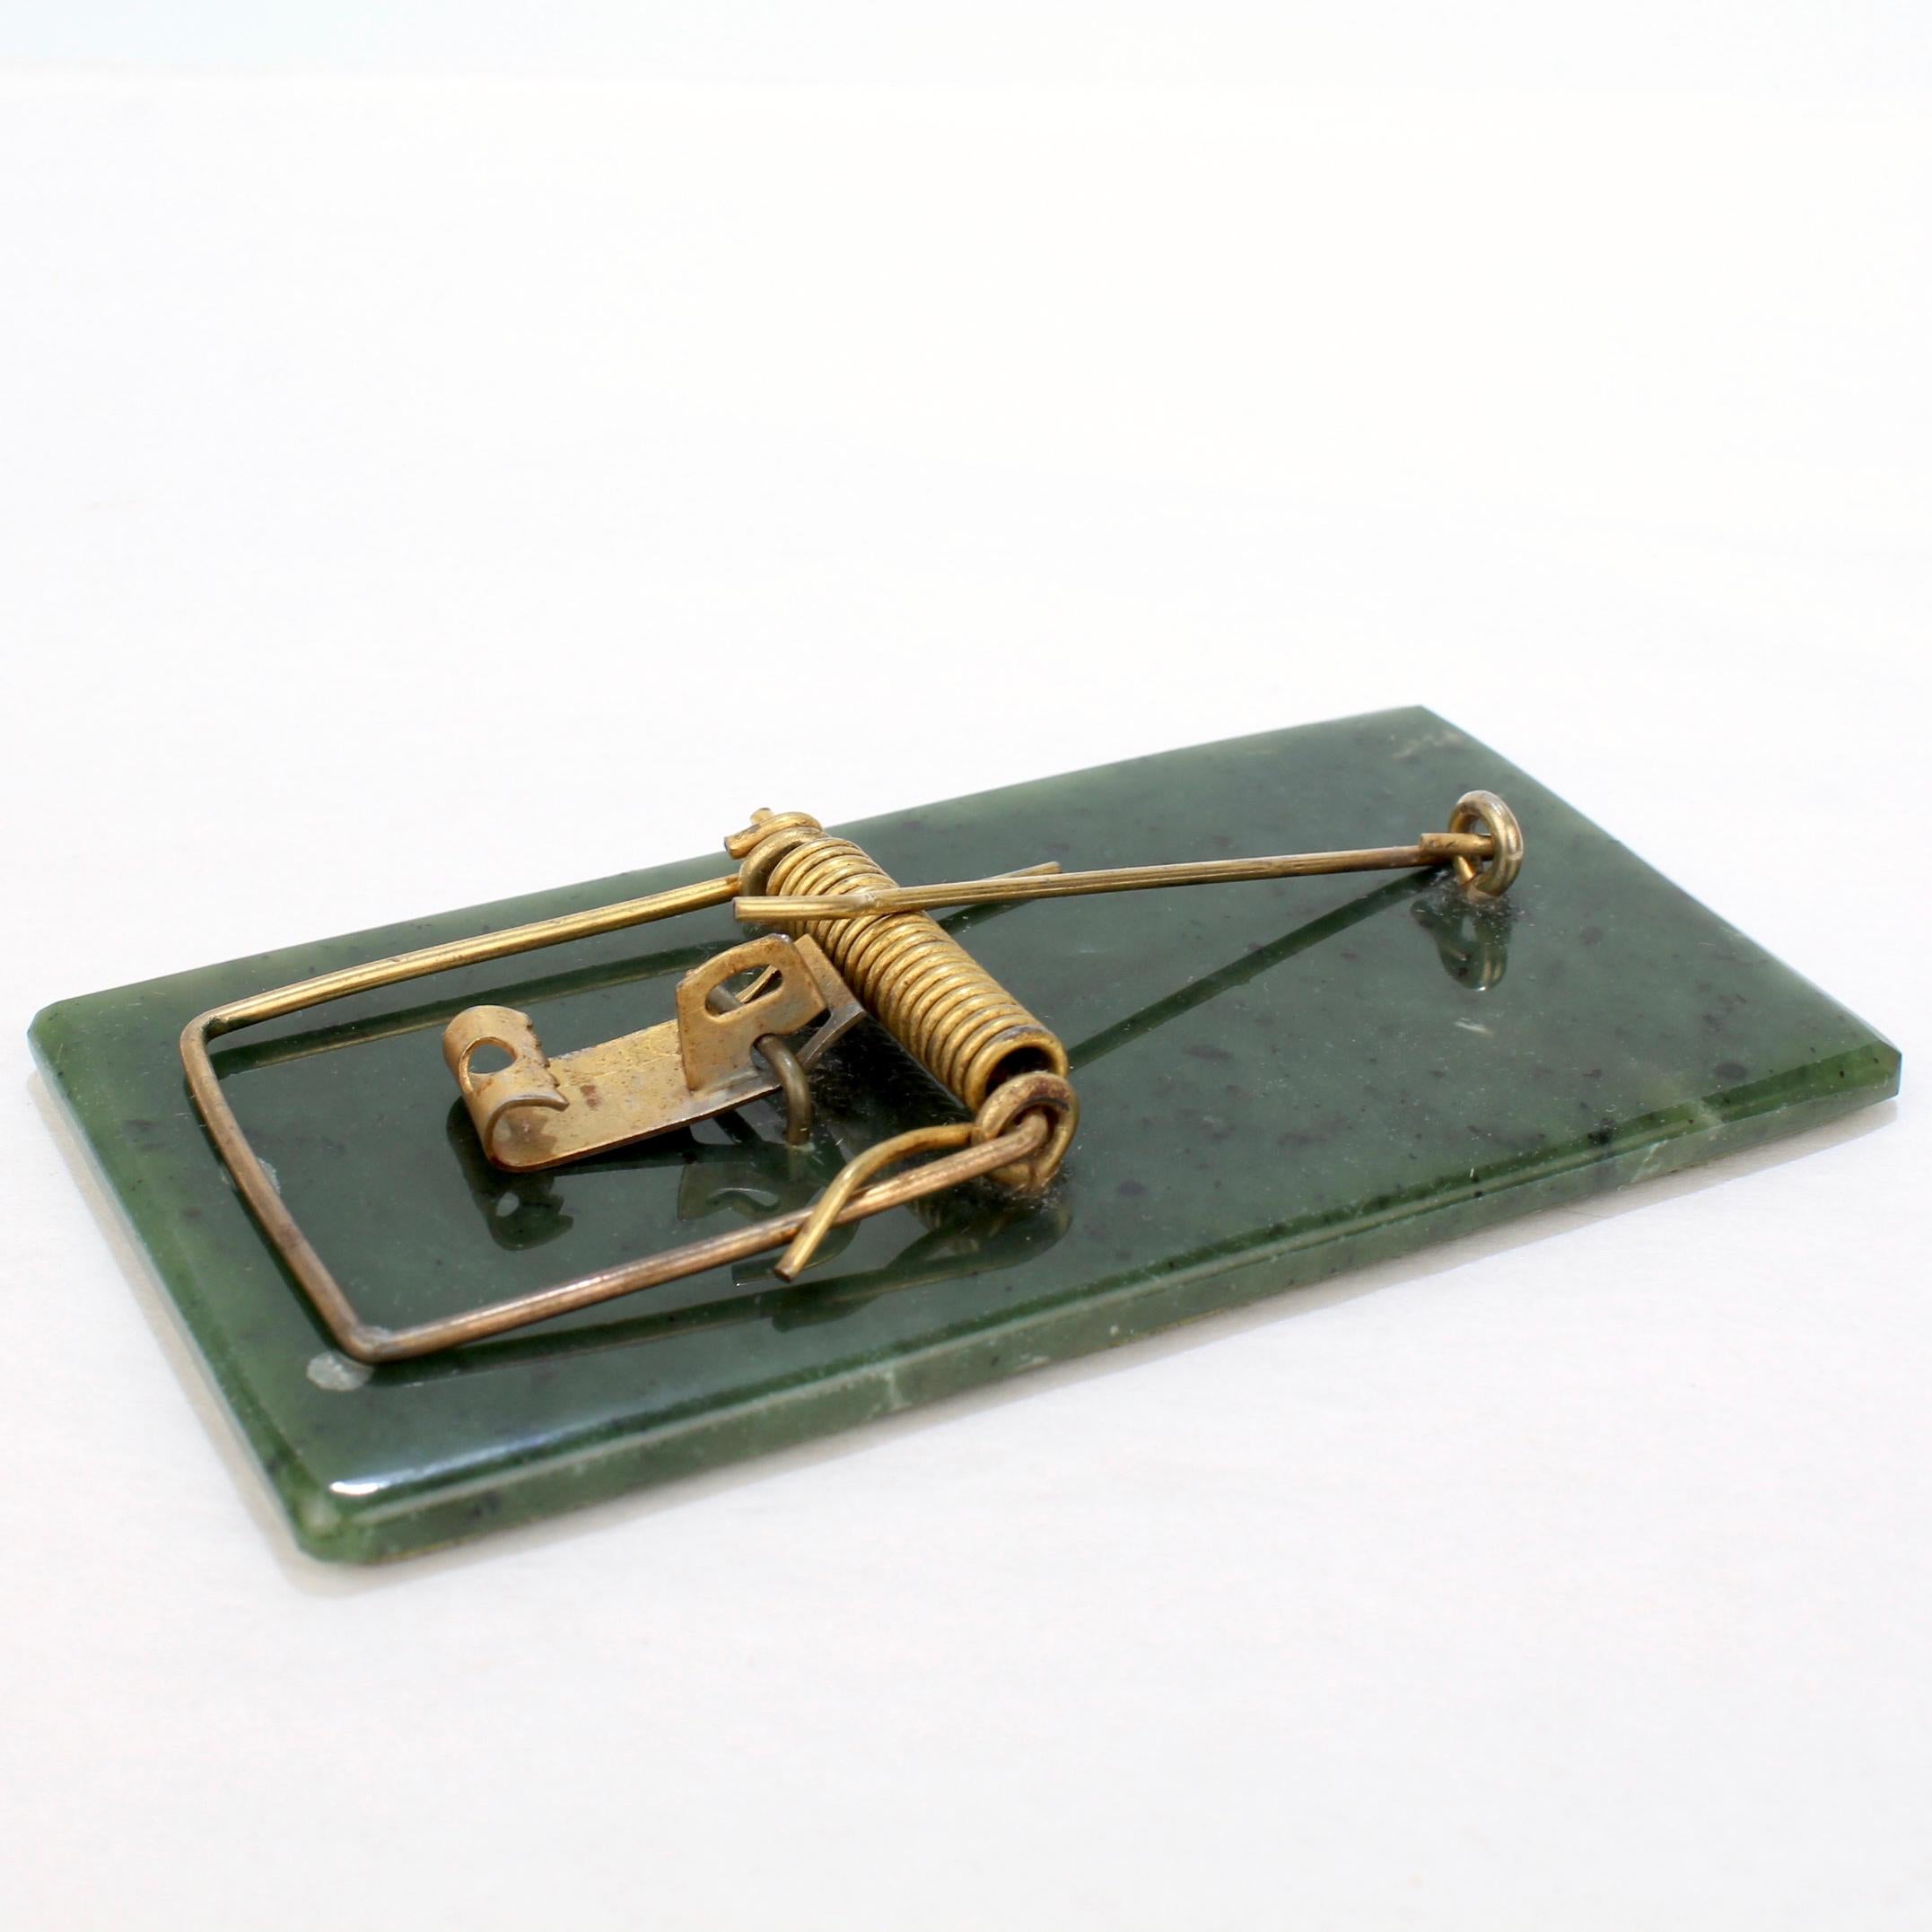 Clearly someone built a better mouse trap....

This amazing mouse trap is made of a polished platform of jadeite (probably Alaskan jade) with a gold plated wire spring, catch and hammer.

Someone seems to have tested the mechanism, and it looks to